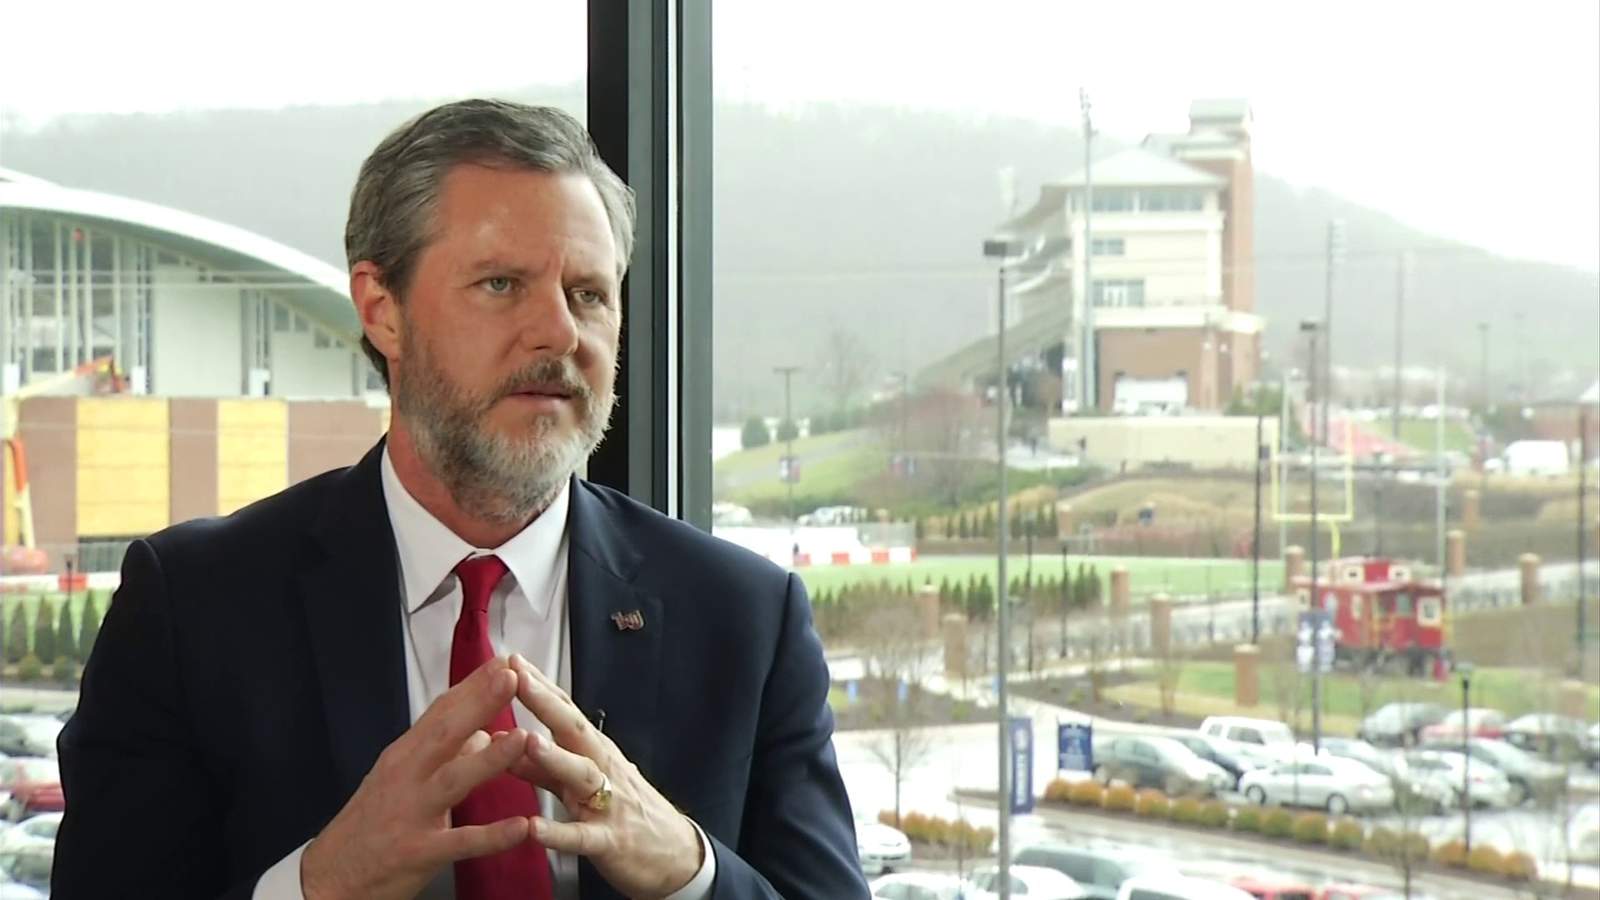 Former Liberty University president Jerry Falwell receives his severance pay